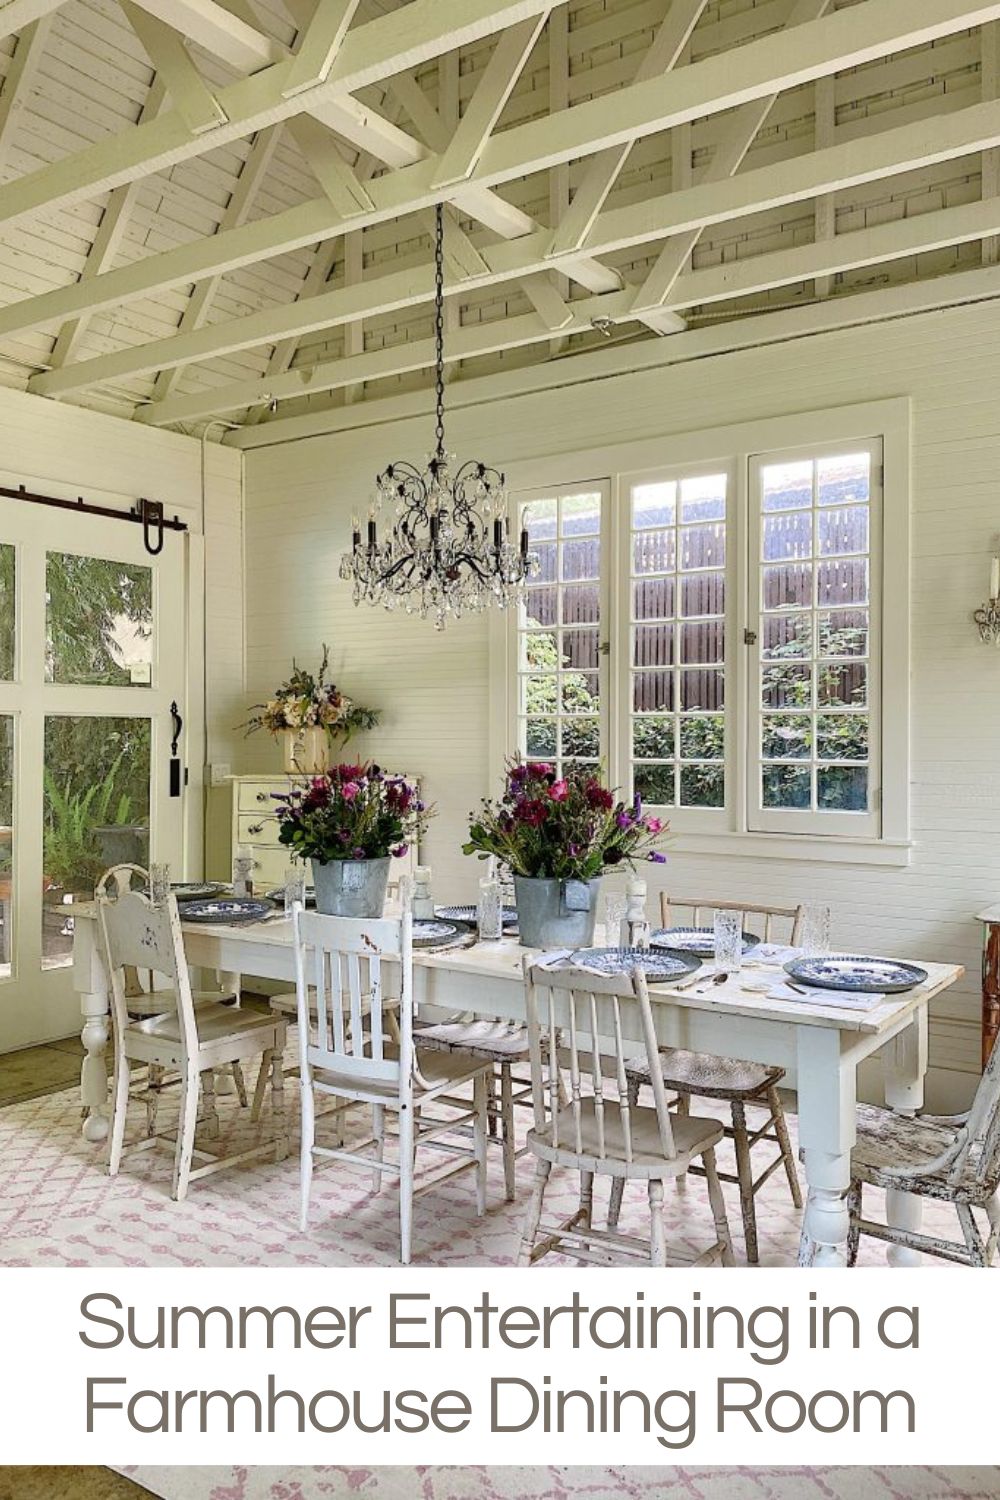 I am back to entertaining again and today I am setting up a fun party in our Carriage House. I love our farmhouse dining room and this new look!